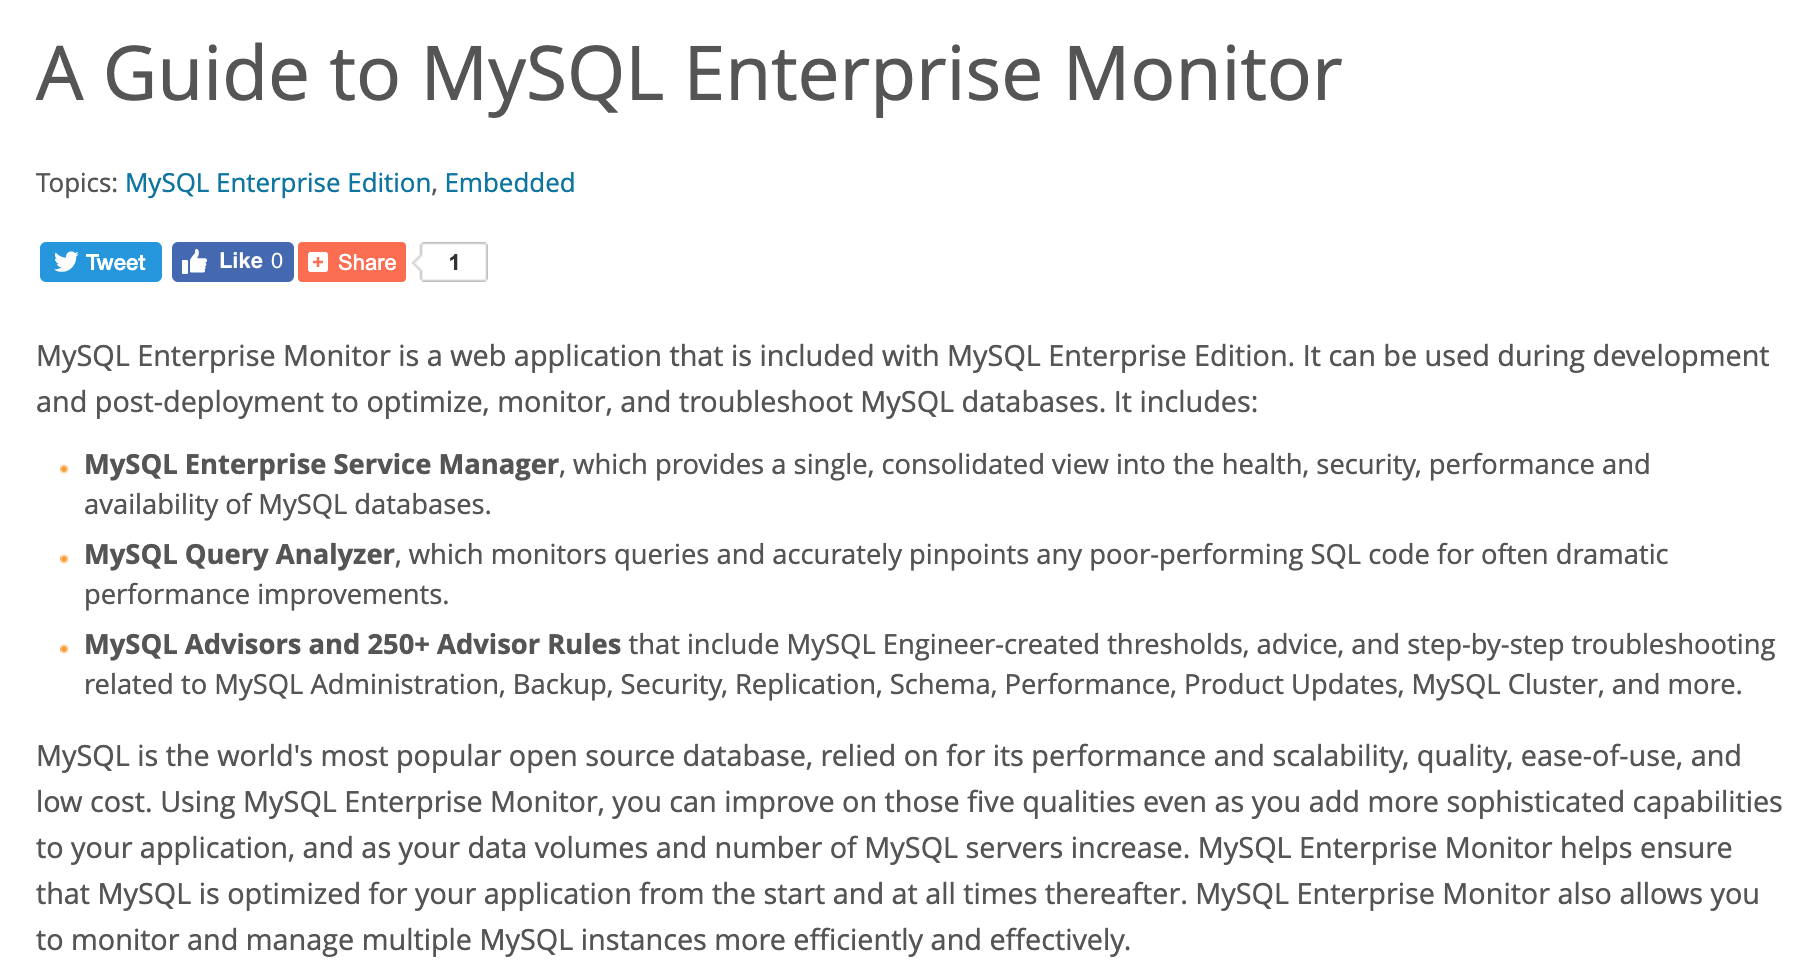 MySQL Enterprise Monitor is a web application that is included with MySQL Enterprise Edition.